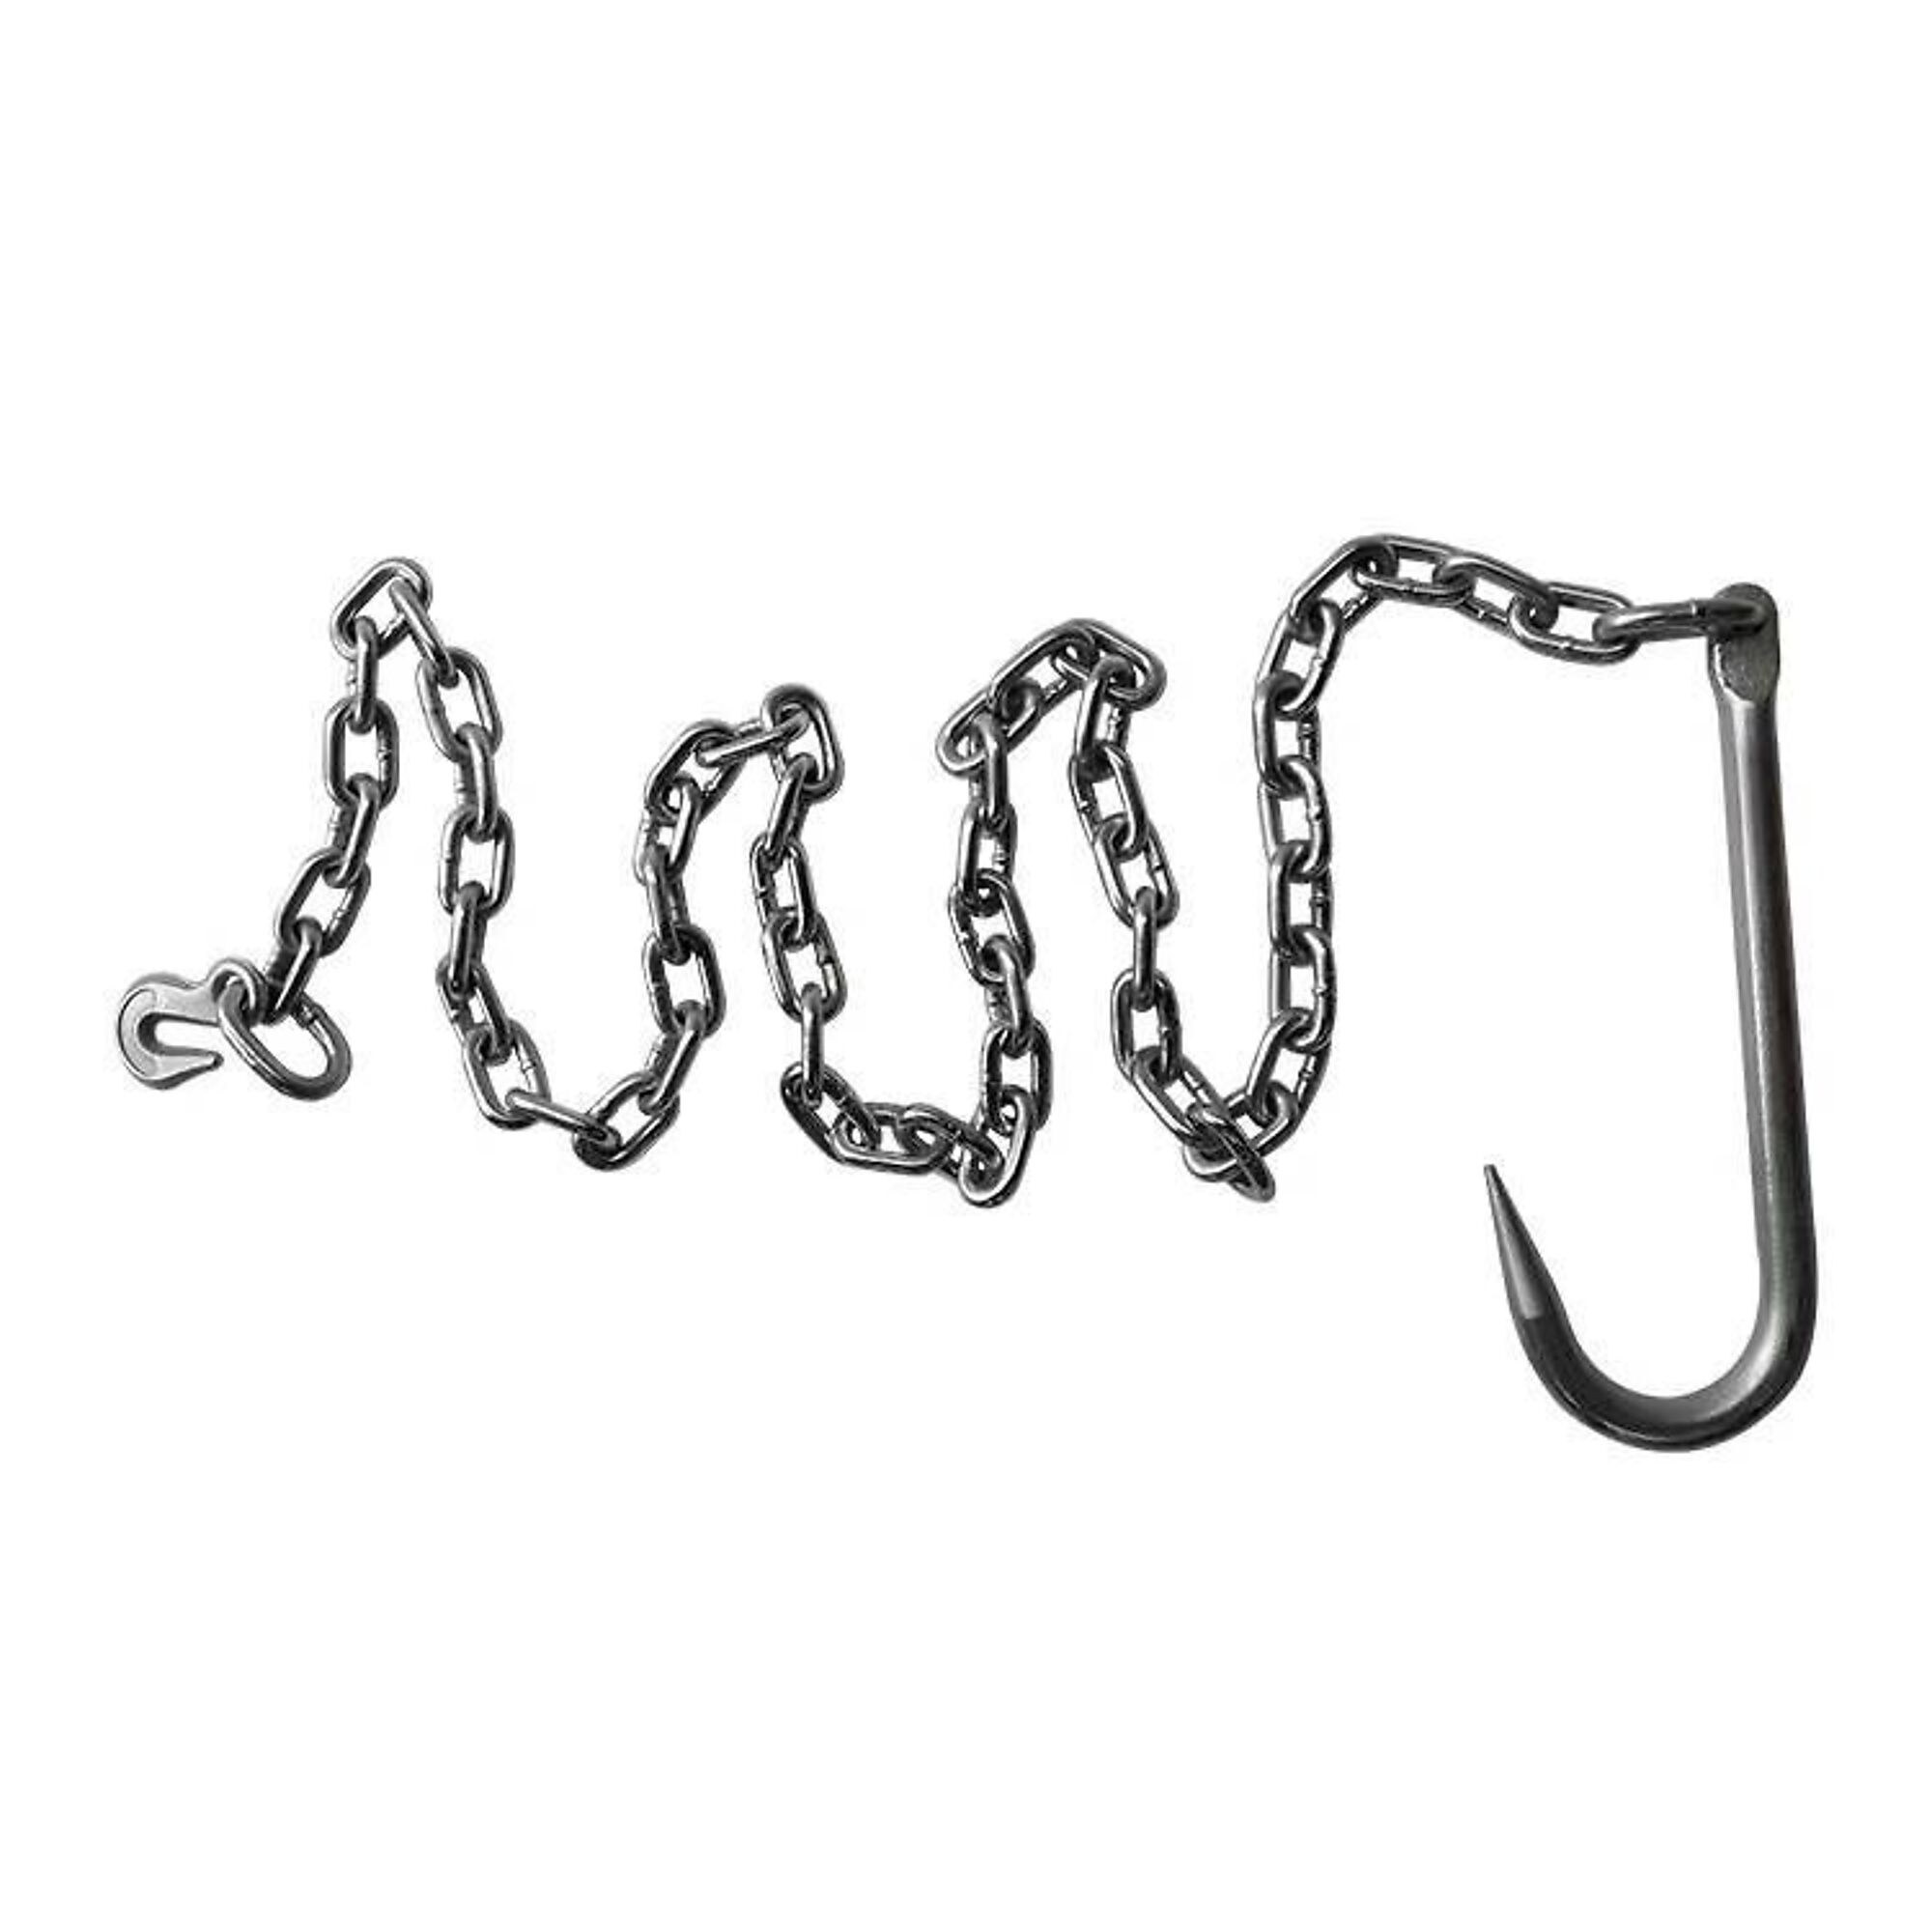 Shop Tuff, Chain with J-Hook, Working Load Limit 4700 lb, Model STF-386JH